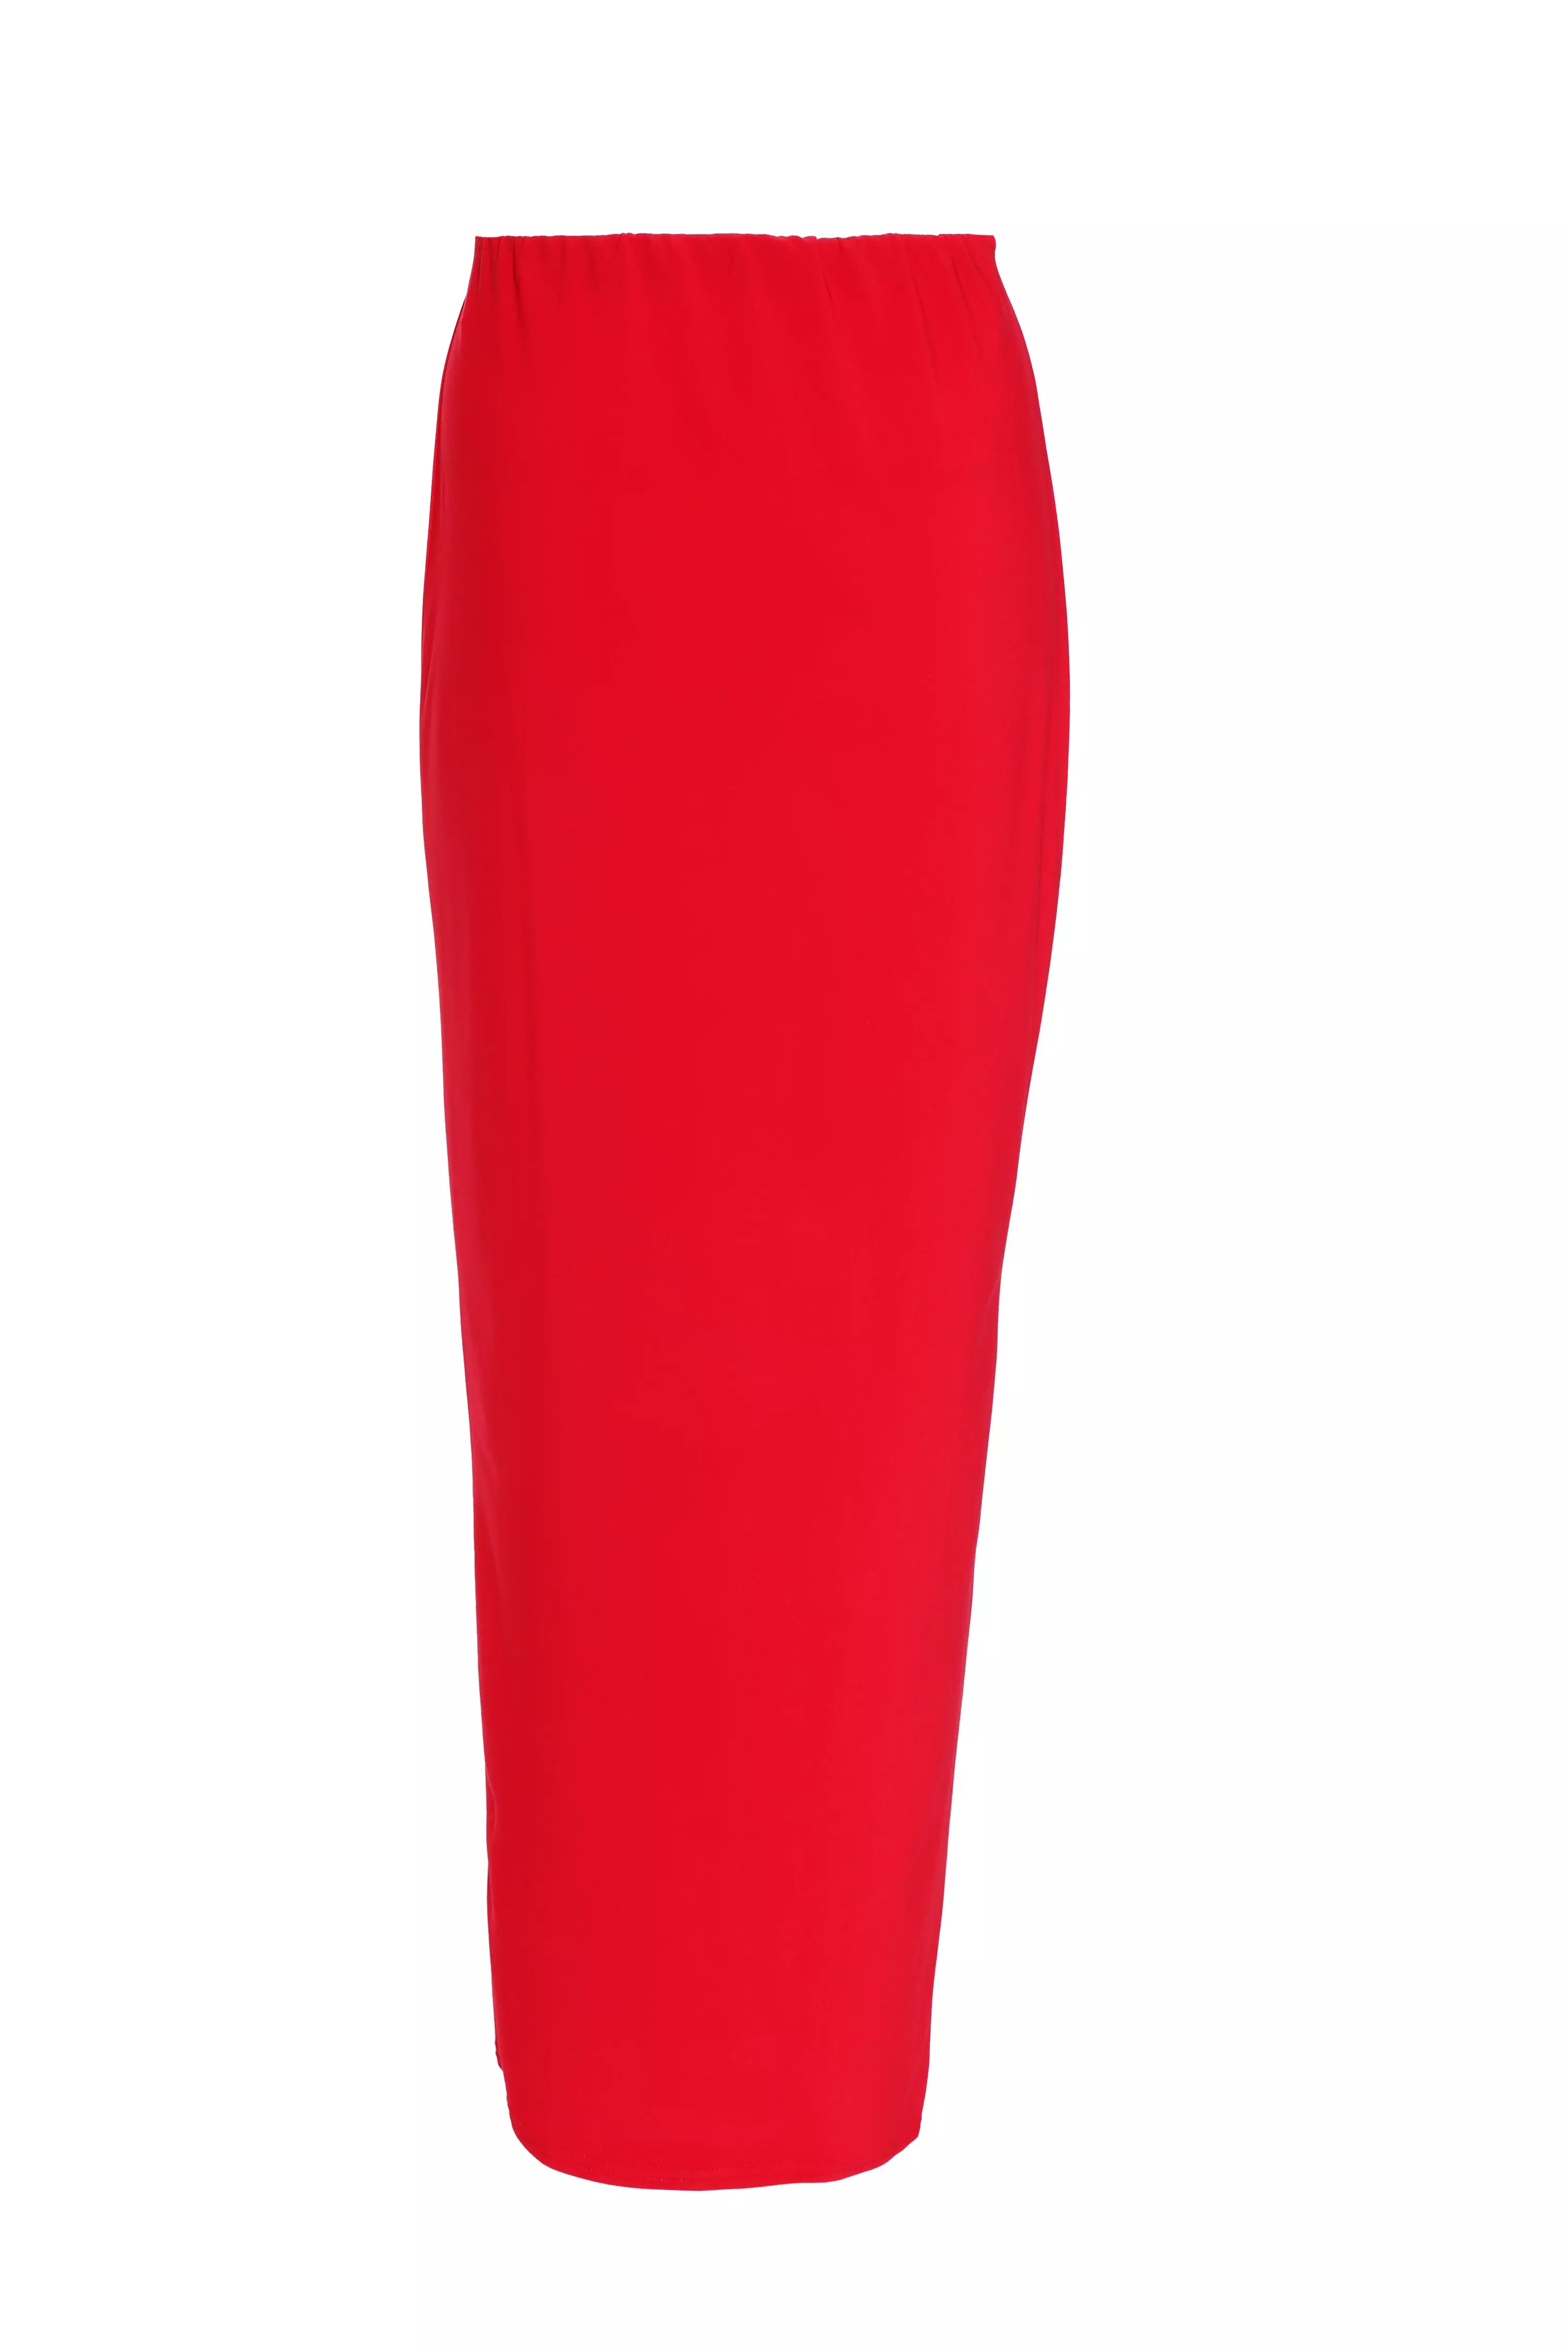 Red Ruched Split Maxi Skirt